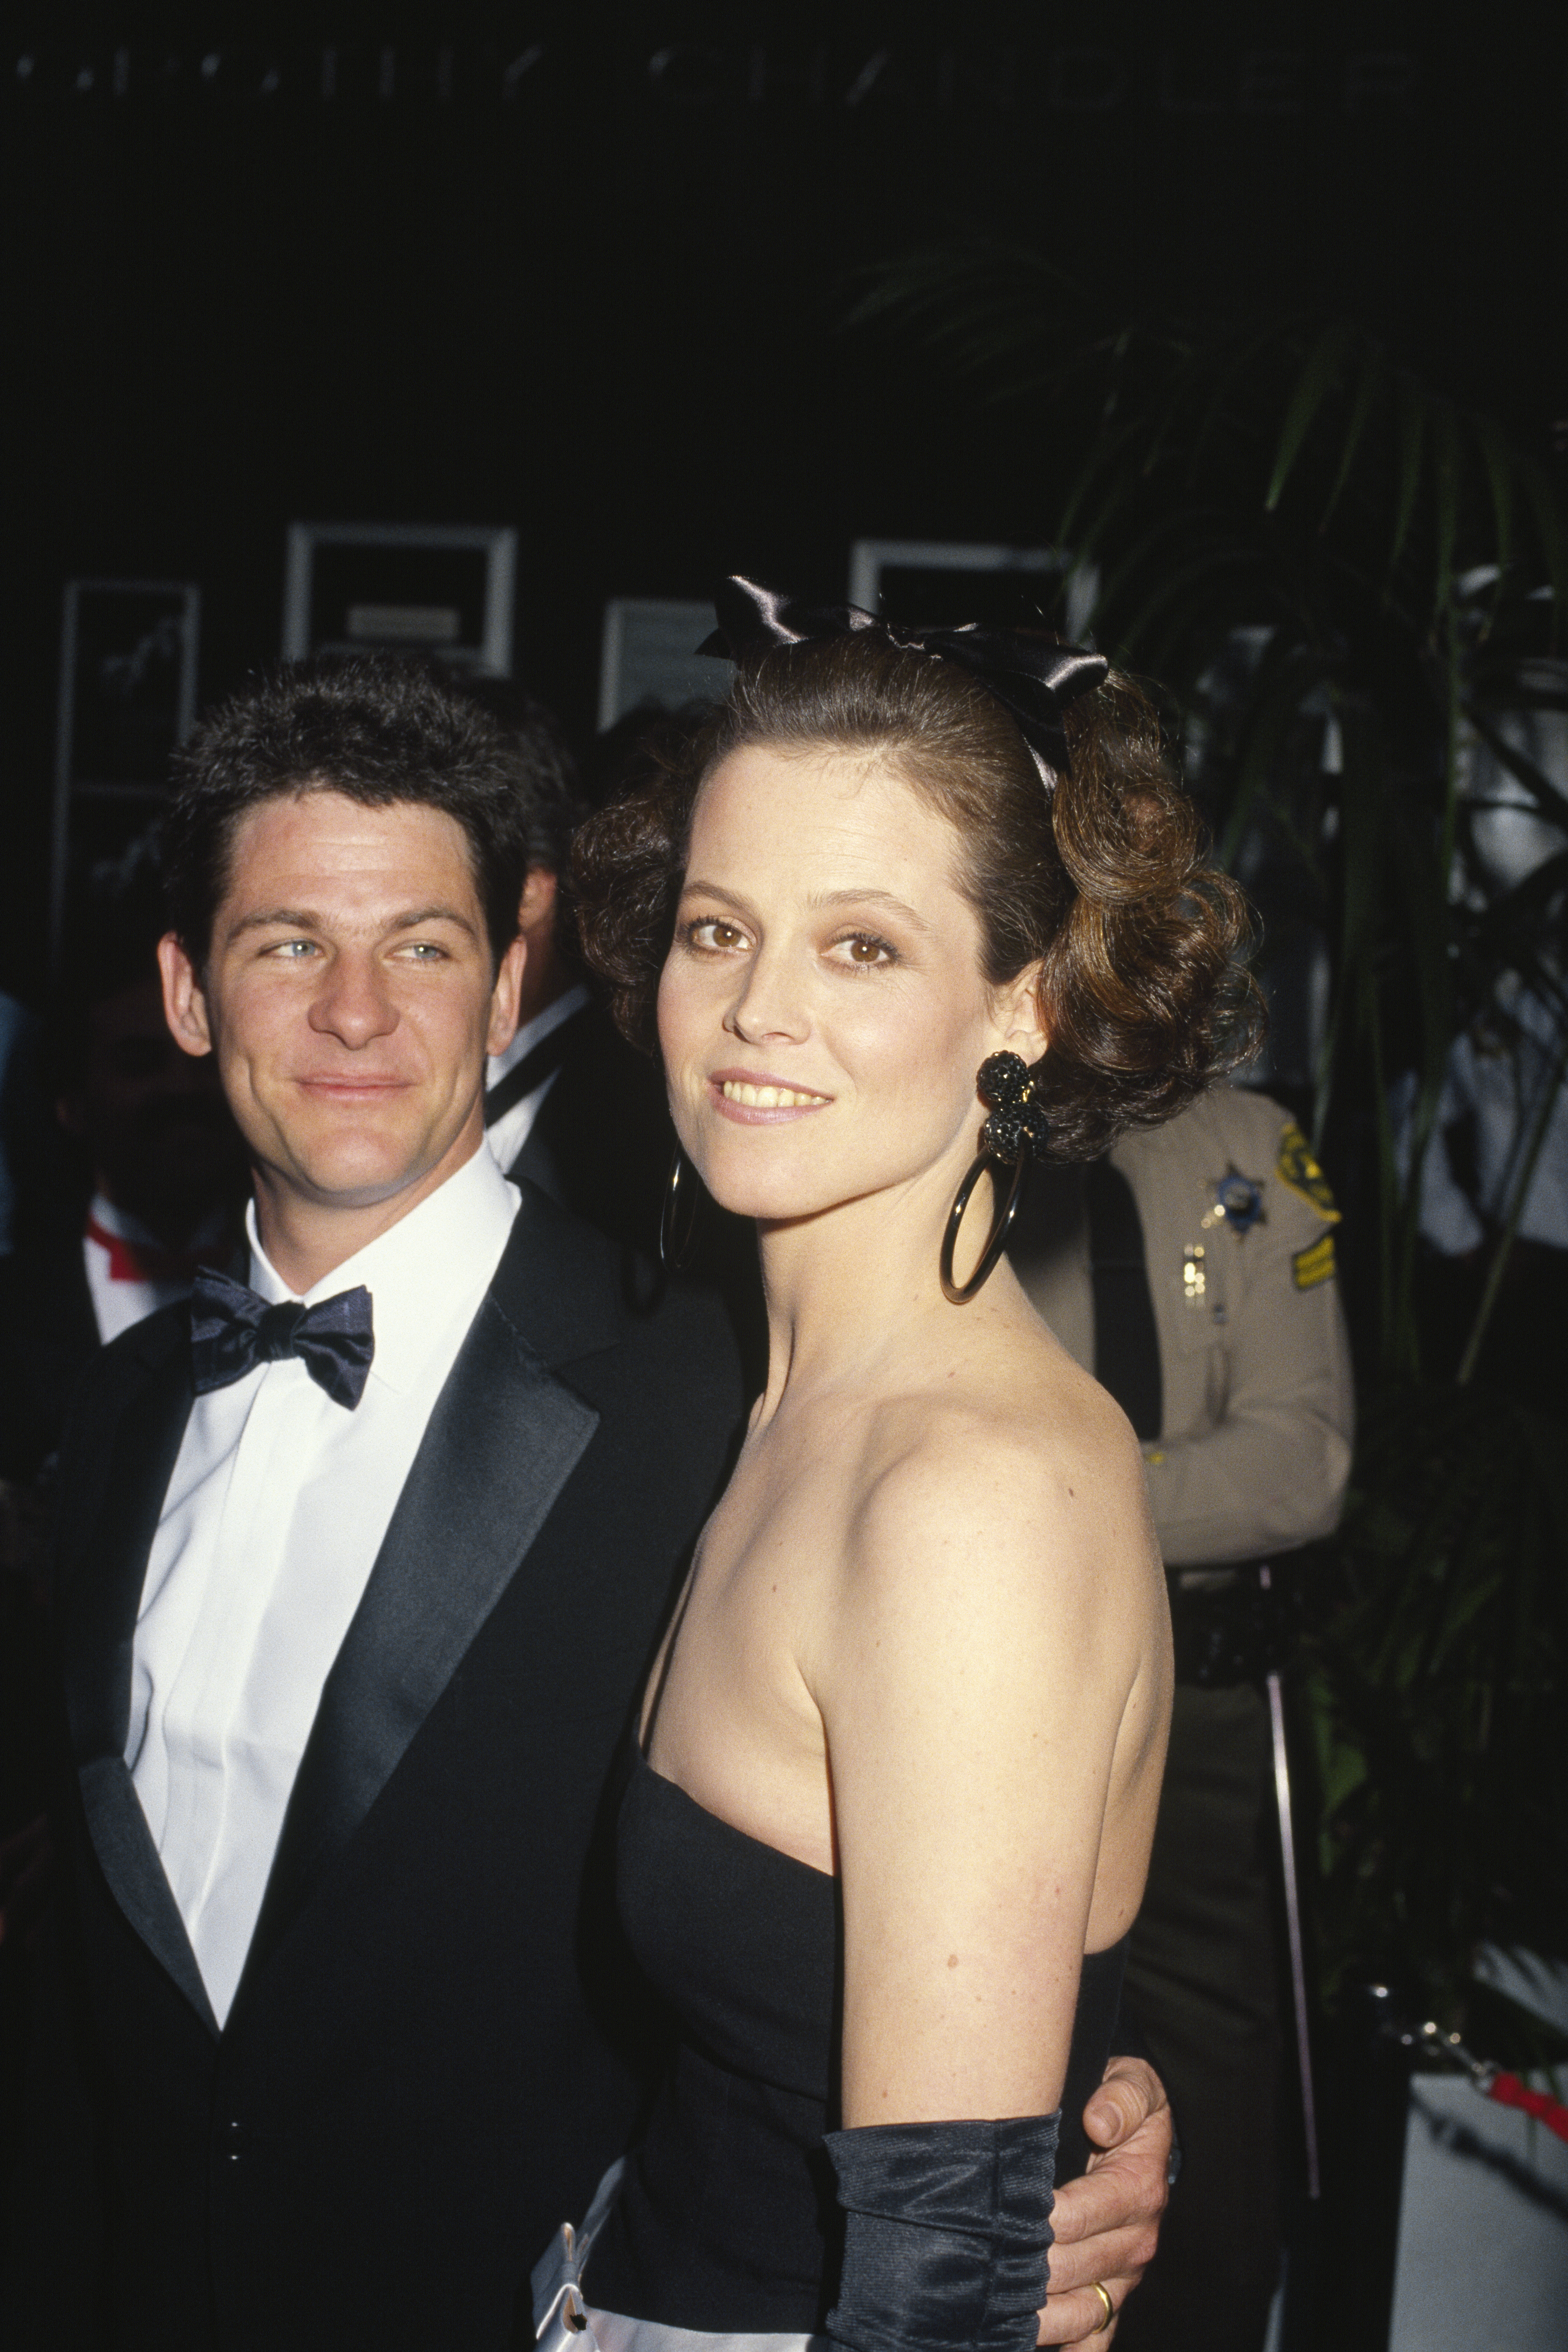 Sigourney Weaver and her husband, Jim Simpson, at the 59th Academy Awards ceremony in Los Angeles on March 30, 1987 | Source: Getty Images